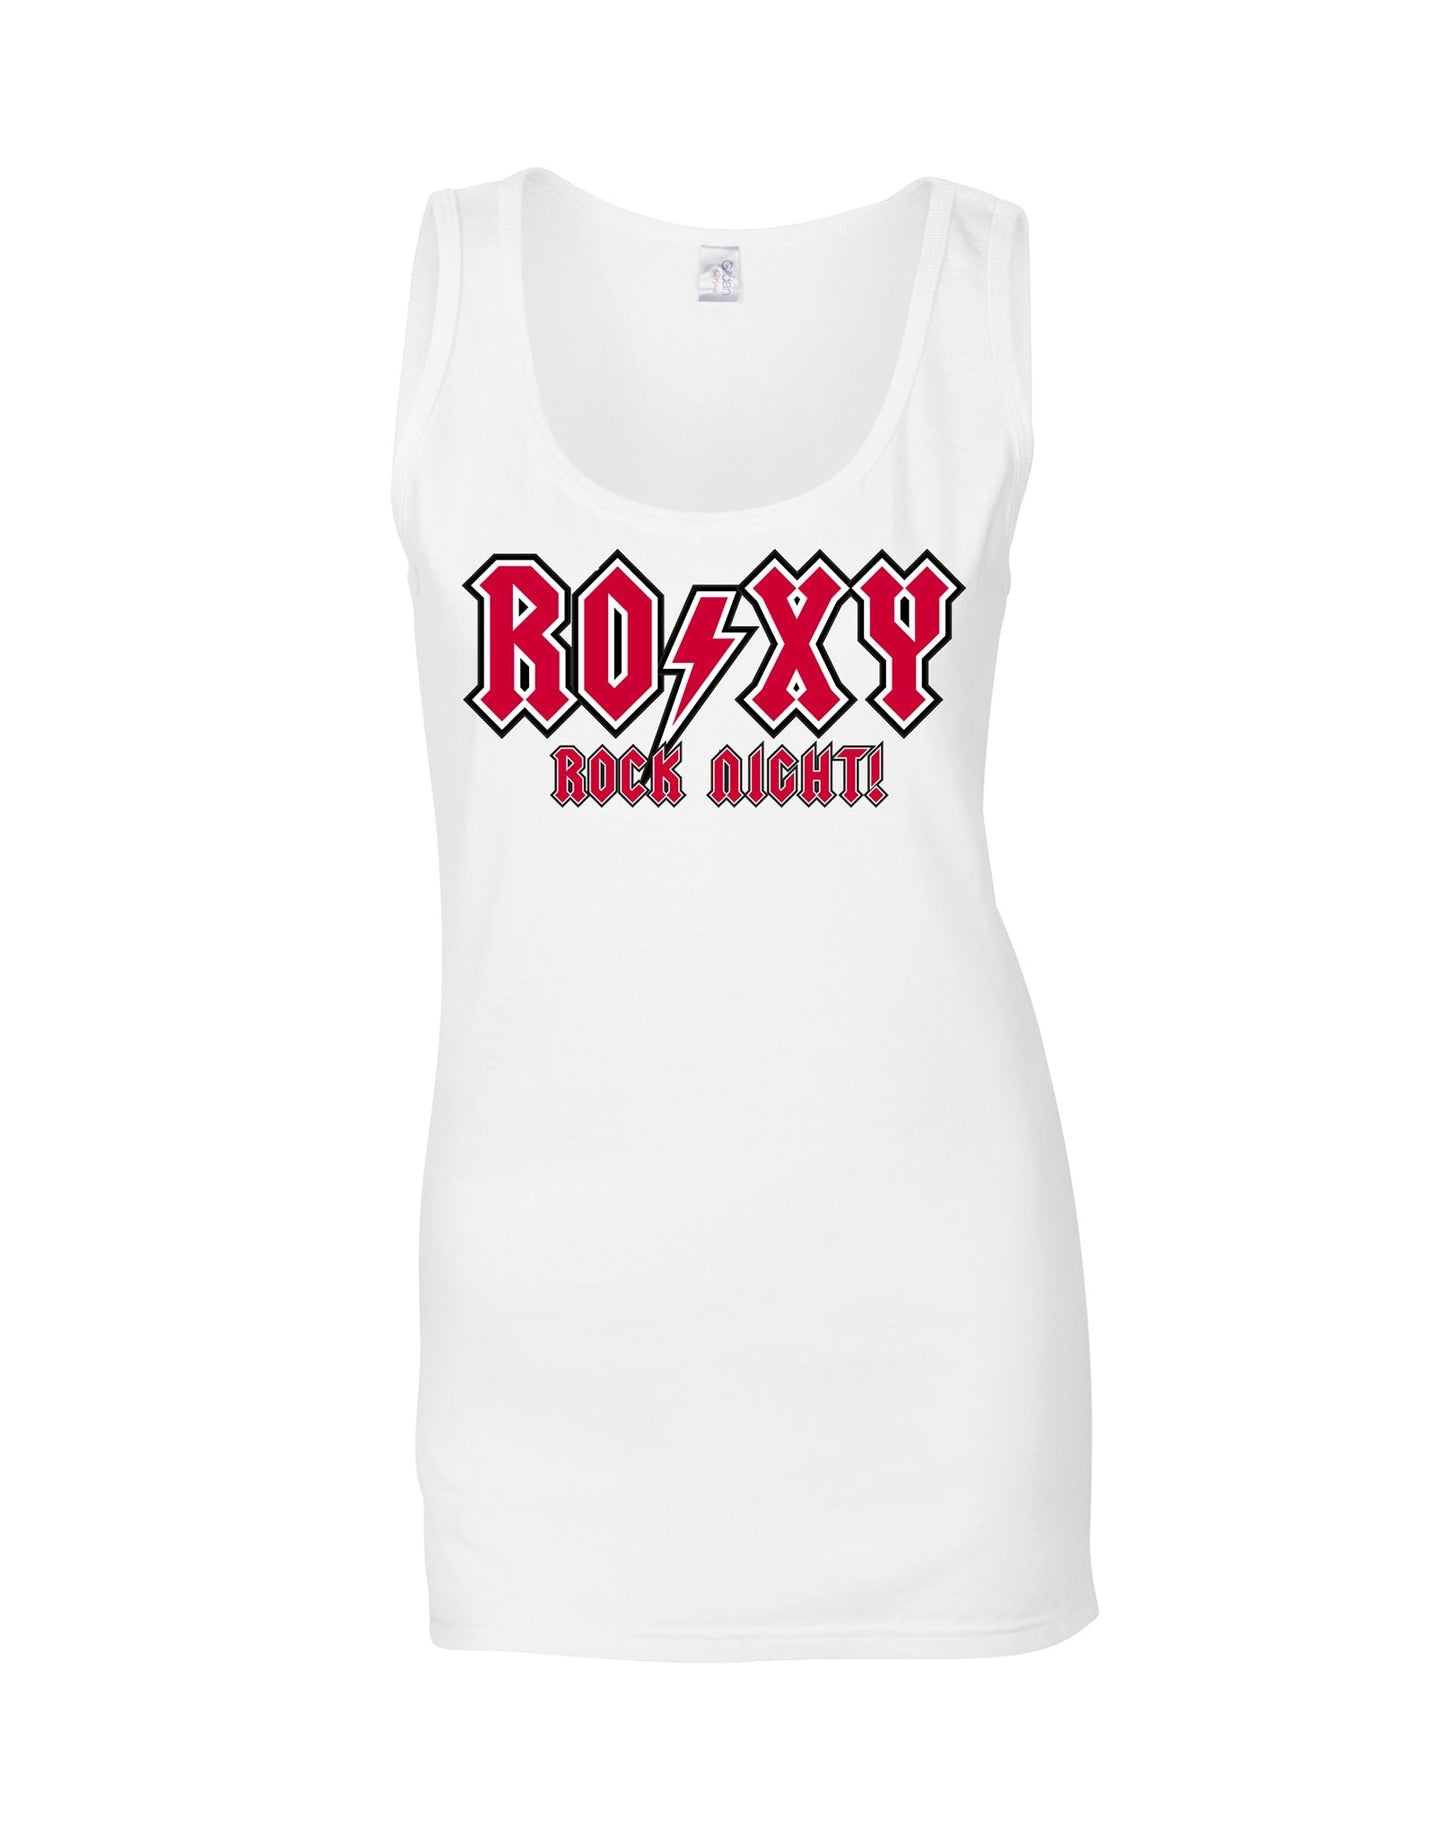 Roxy Rock Night ladies fit vest - various colours - Dirty Stop Outs